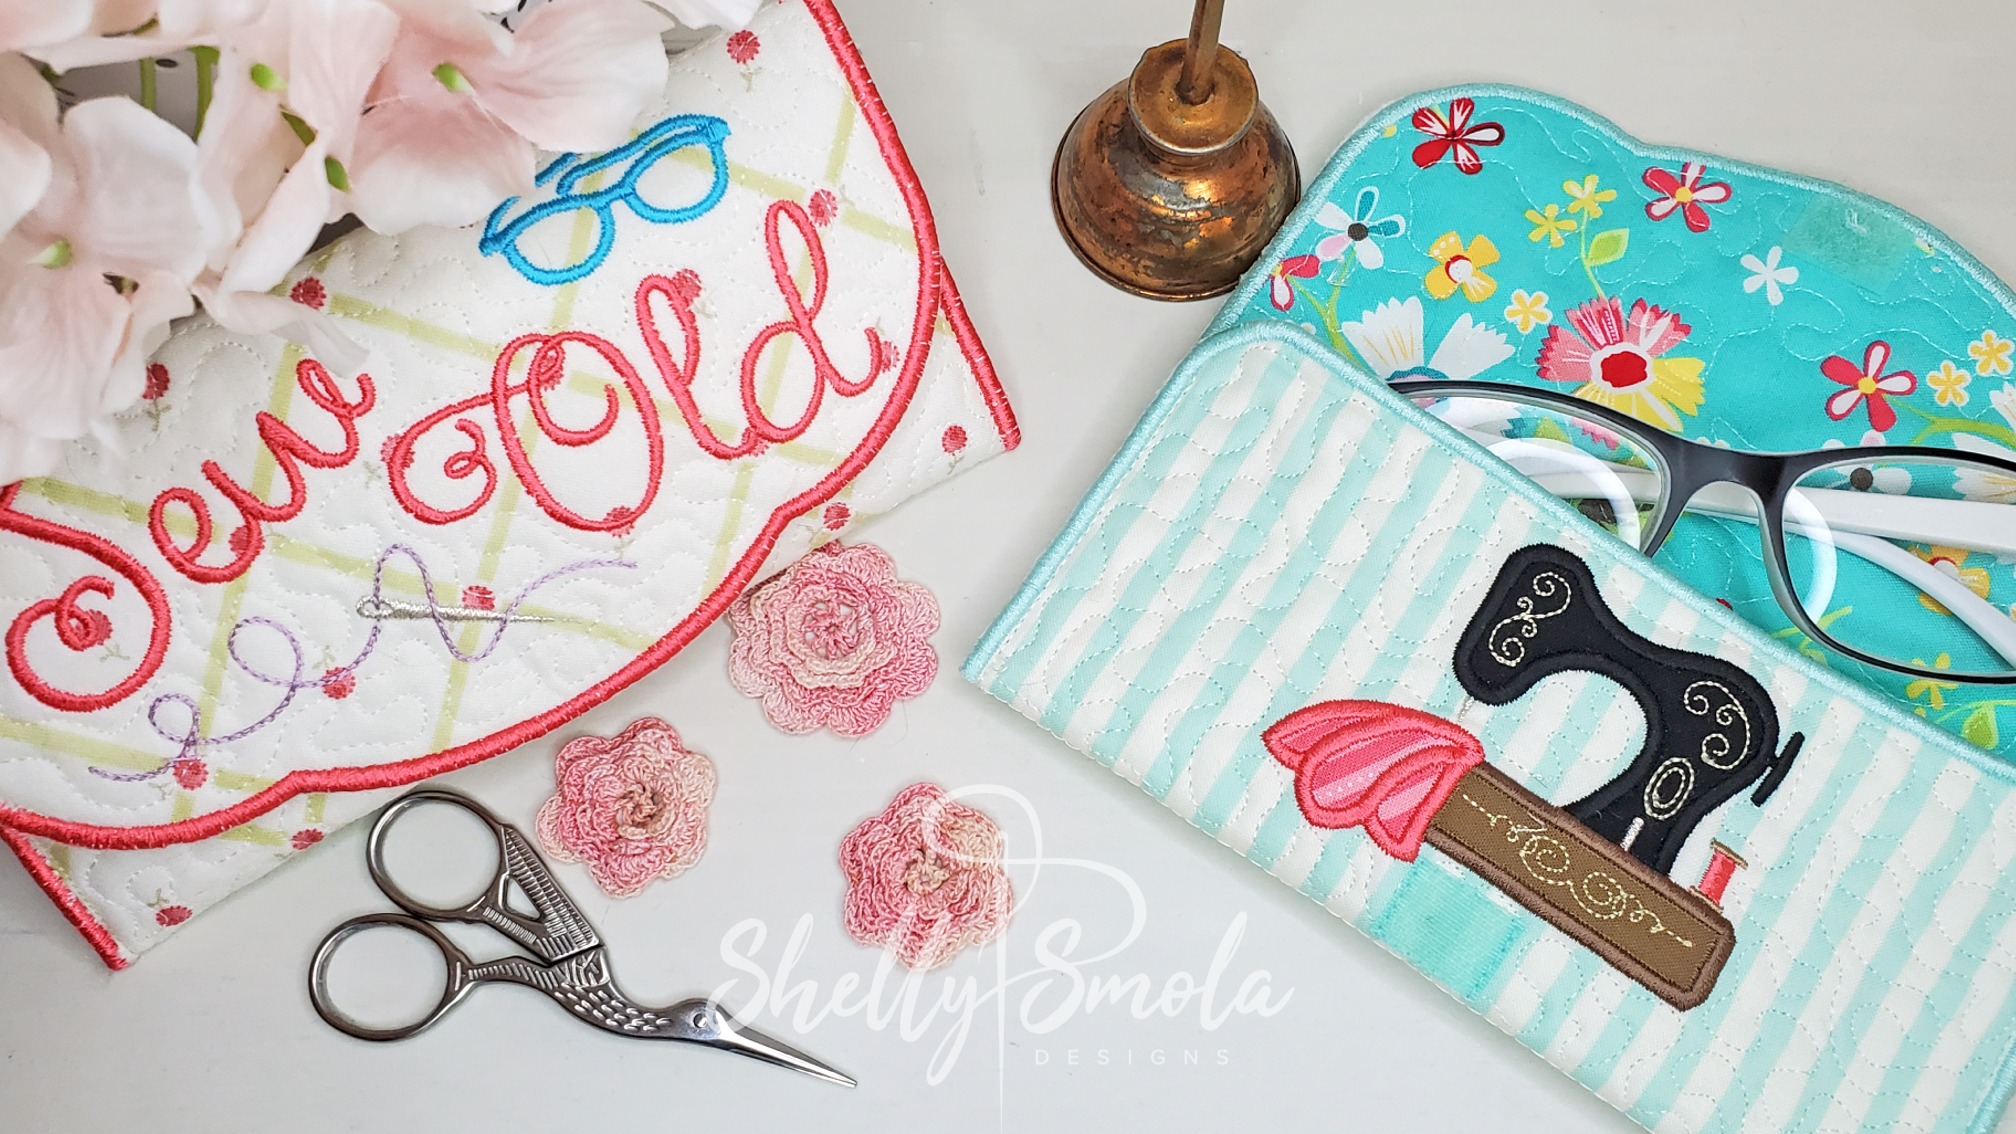 Sew Old Eyeglass Cases by Shelly Smola